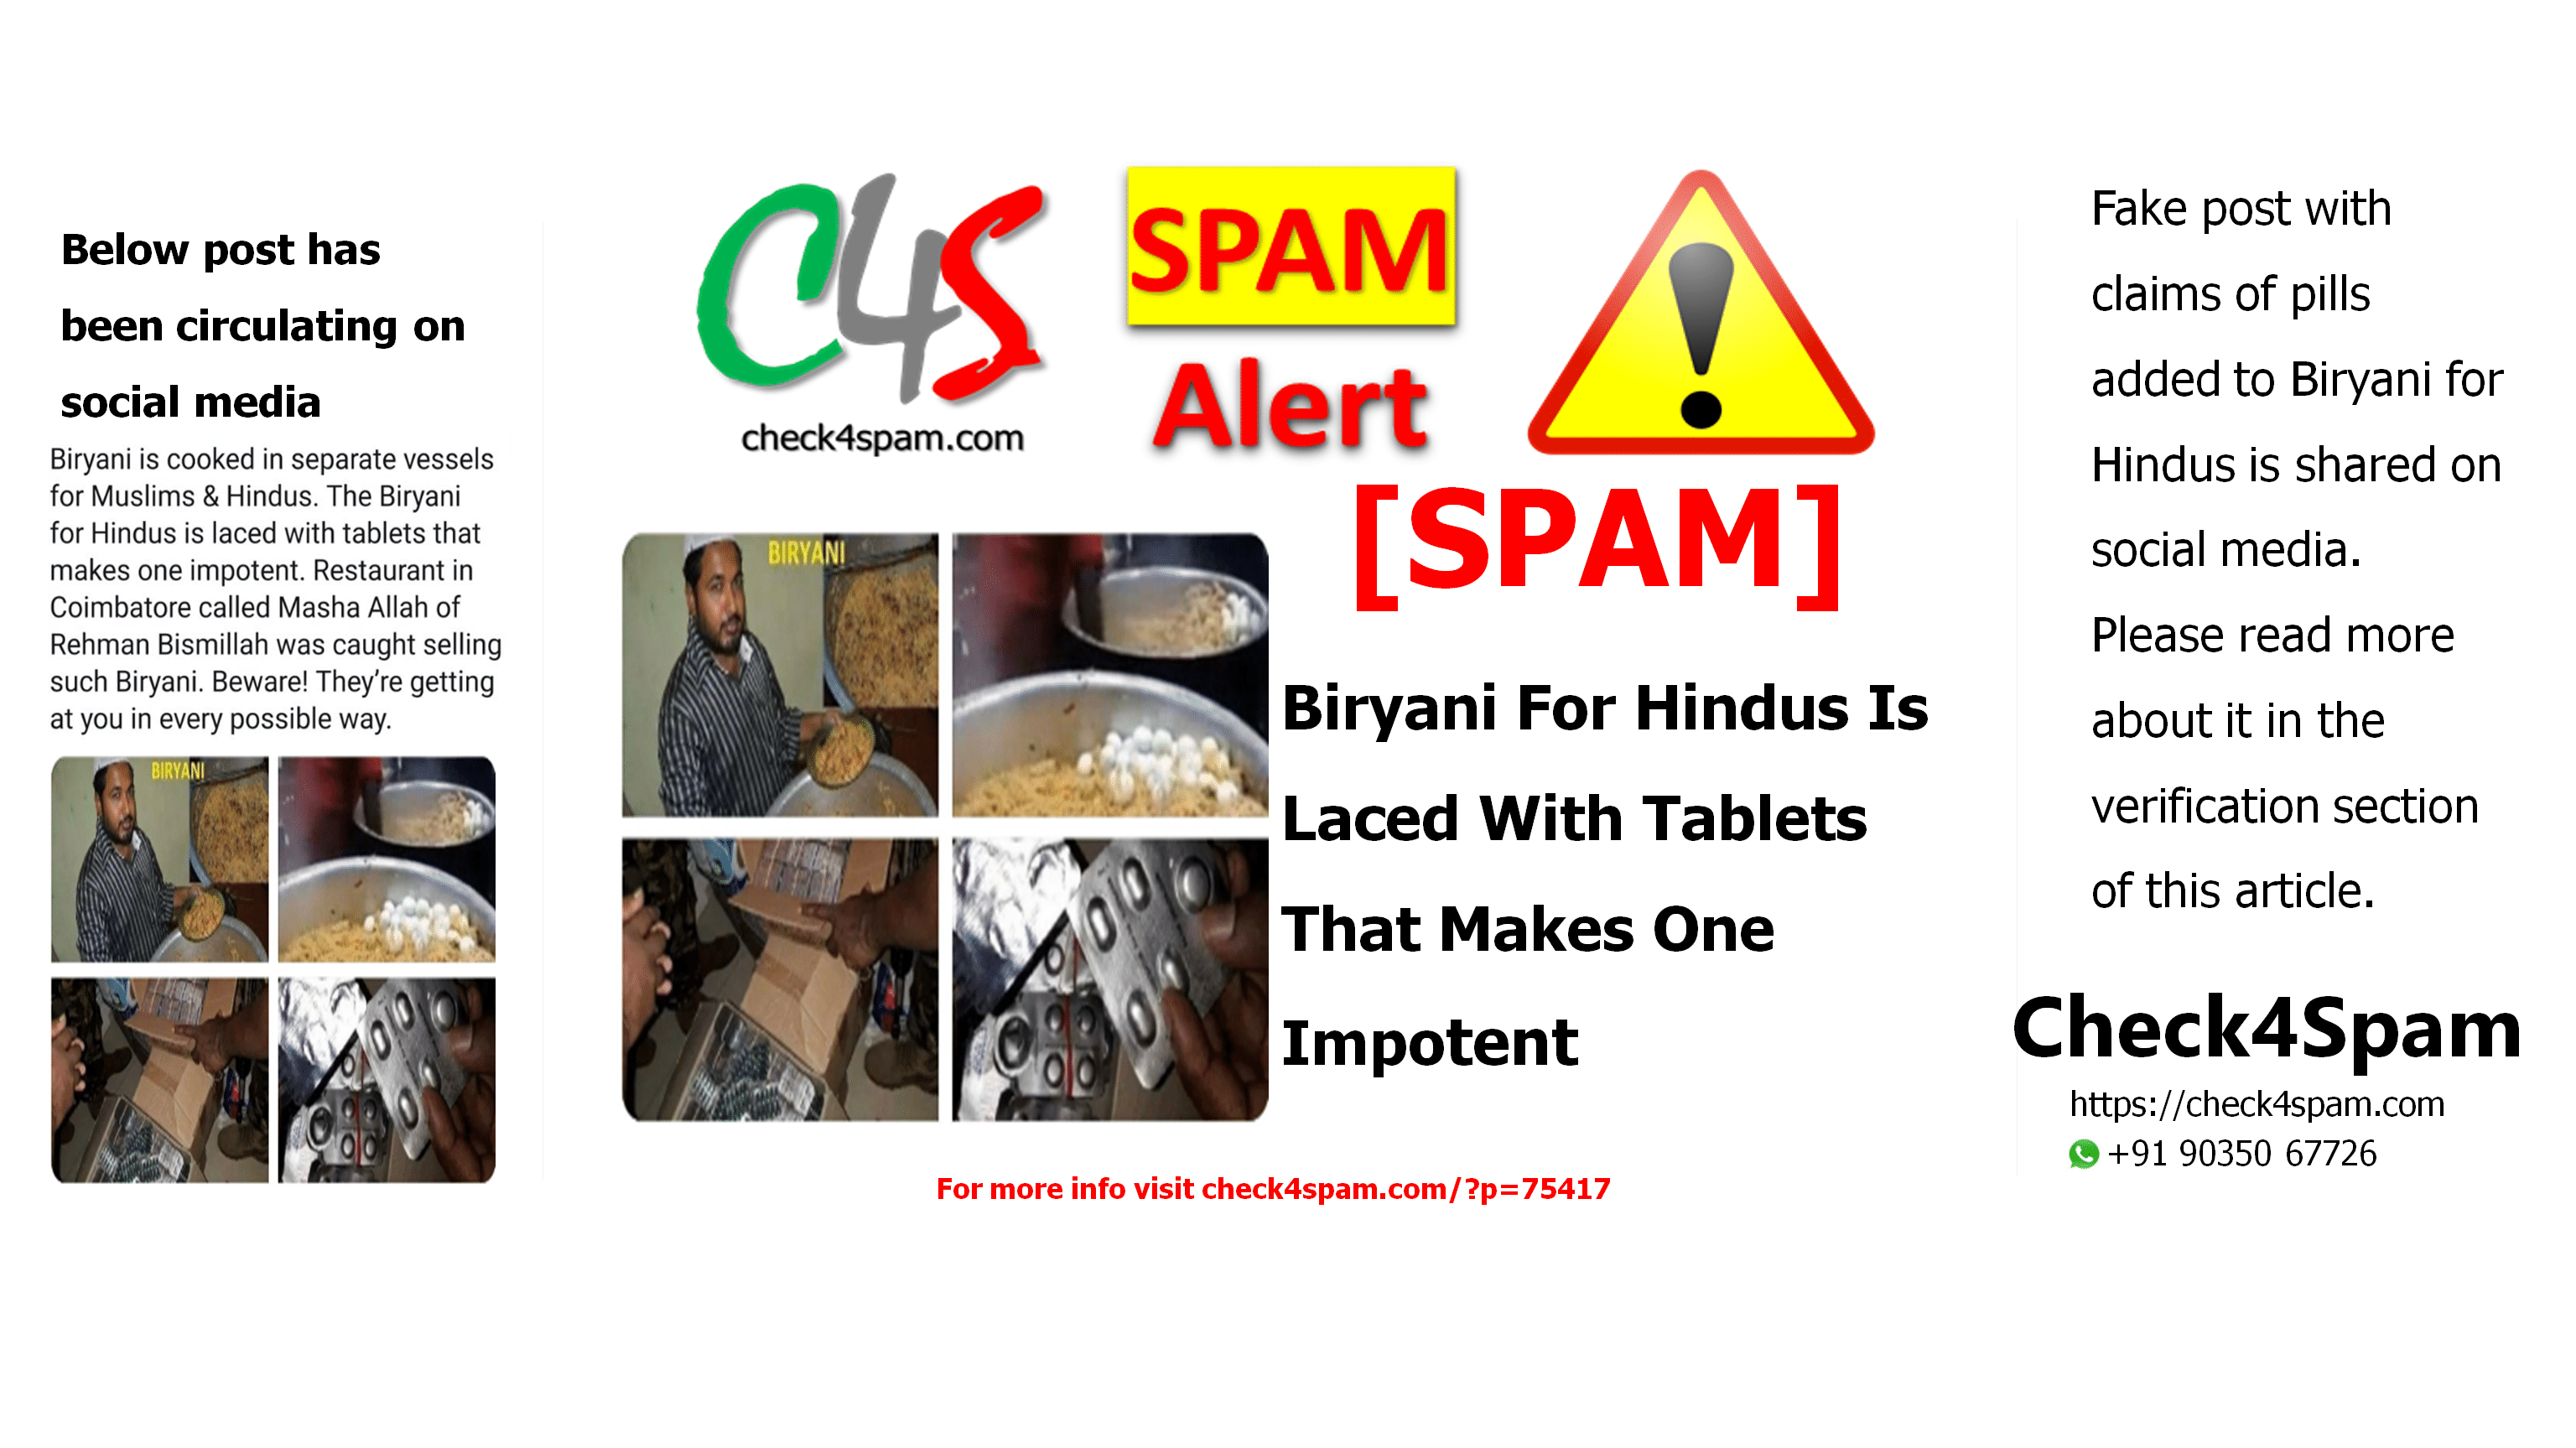 Biryani For Hindus Is Laced With Tablets That Makes One Impotent